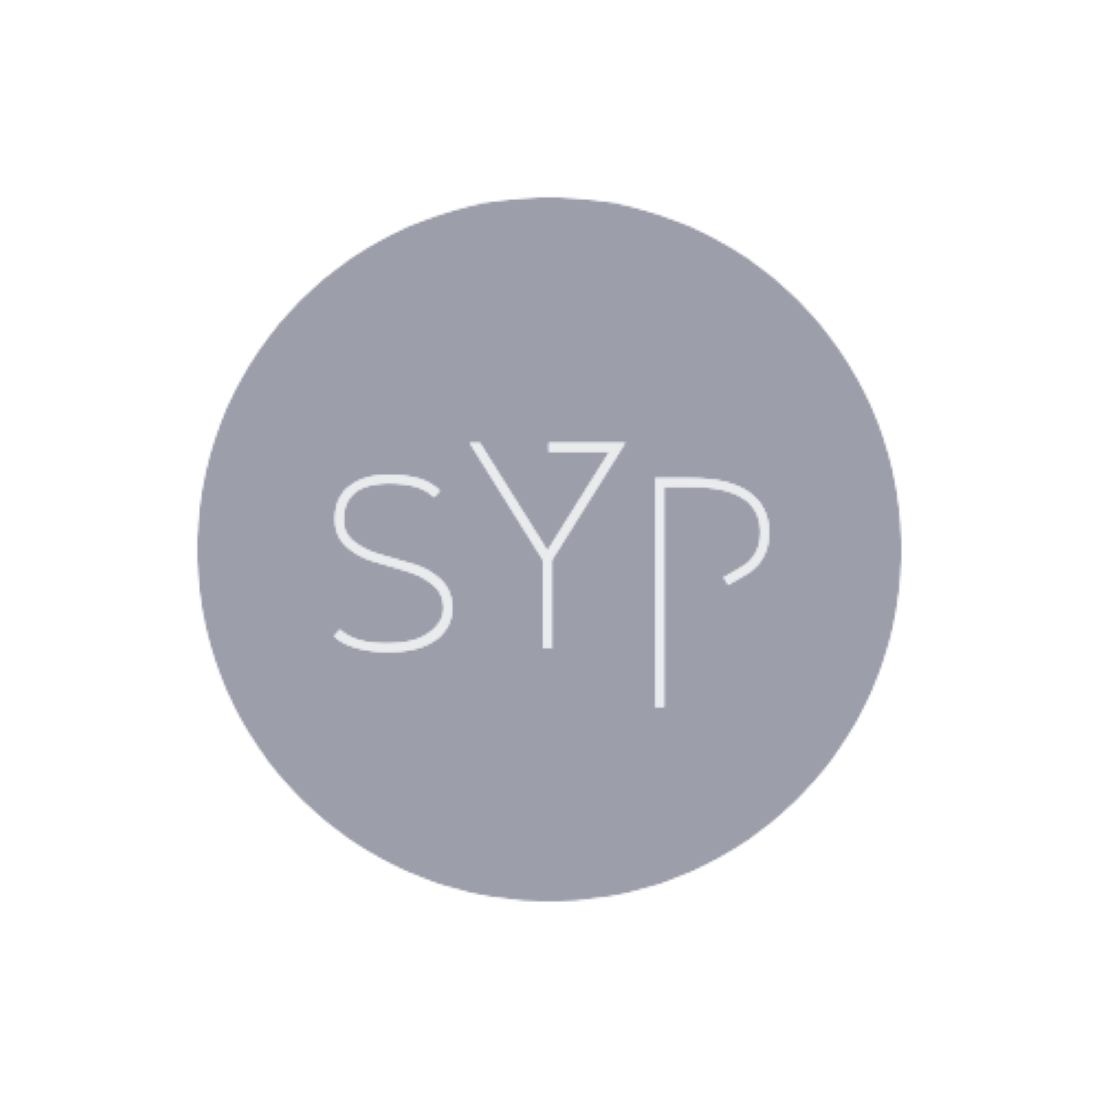 the logo for sYp